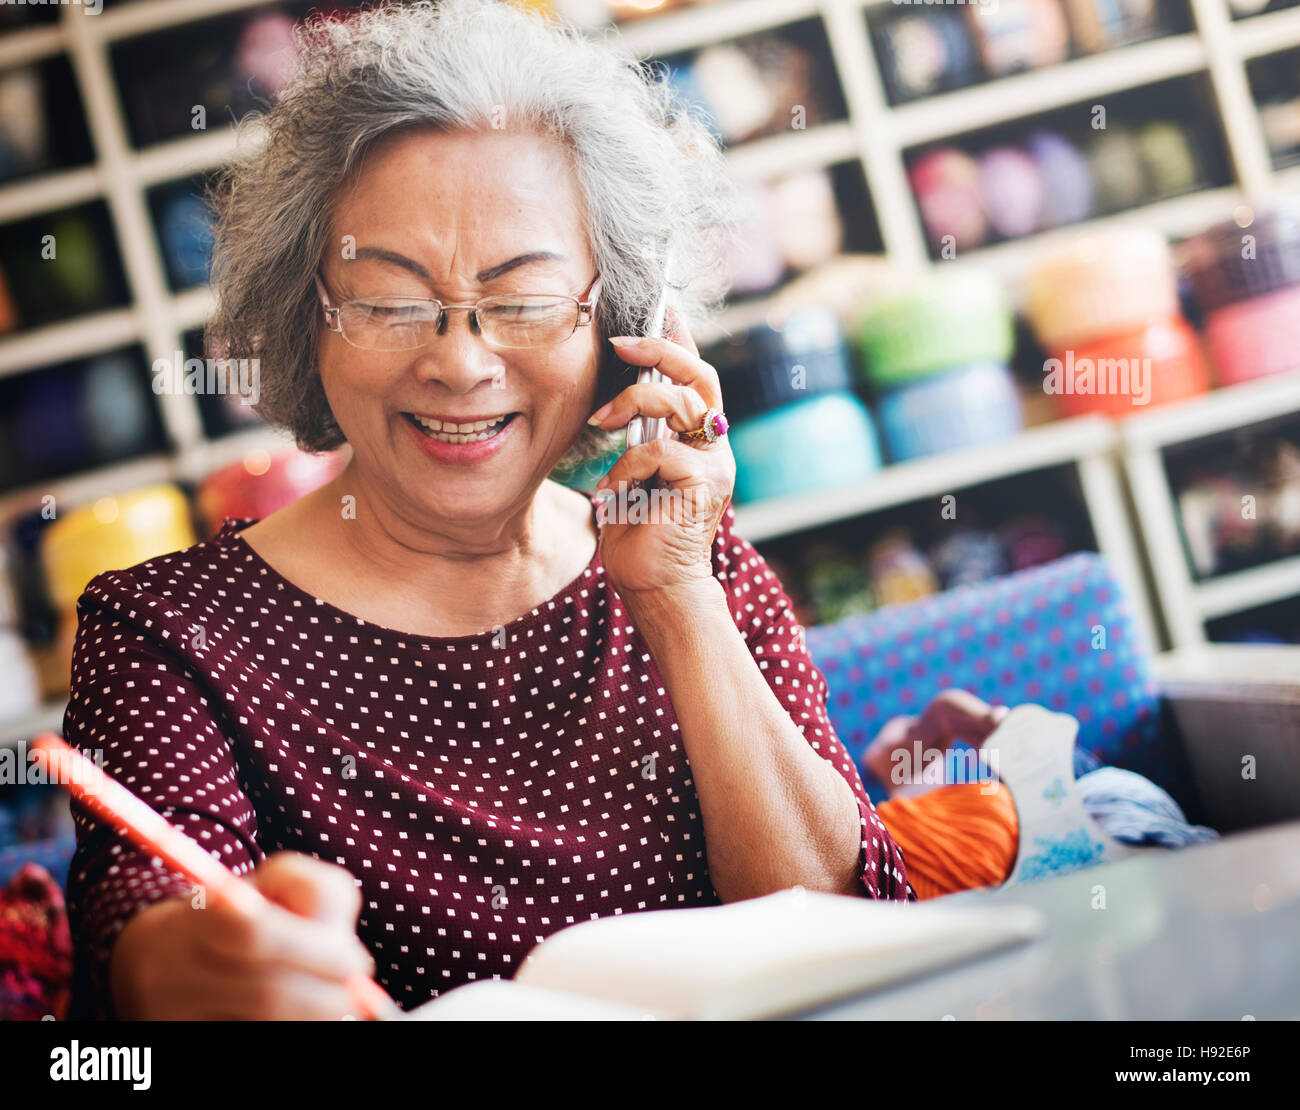 Mobility Calling Customer Support Order Concept Stock Photo